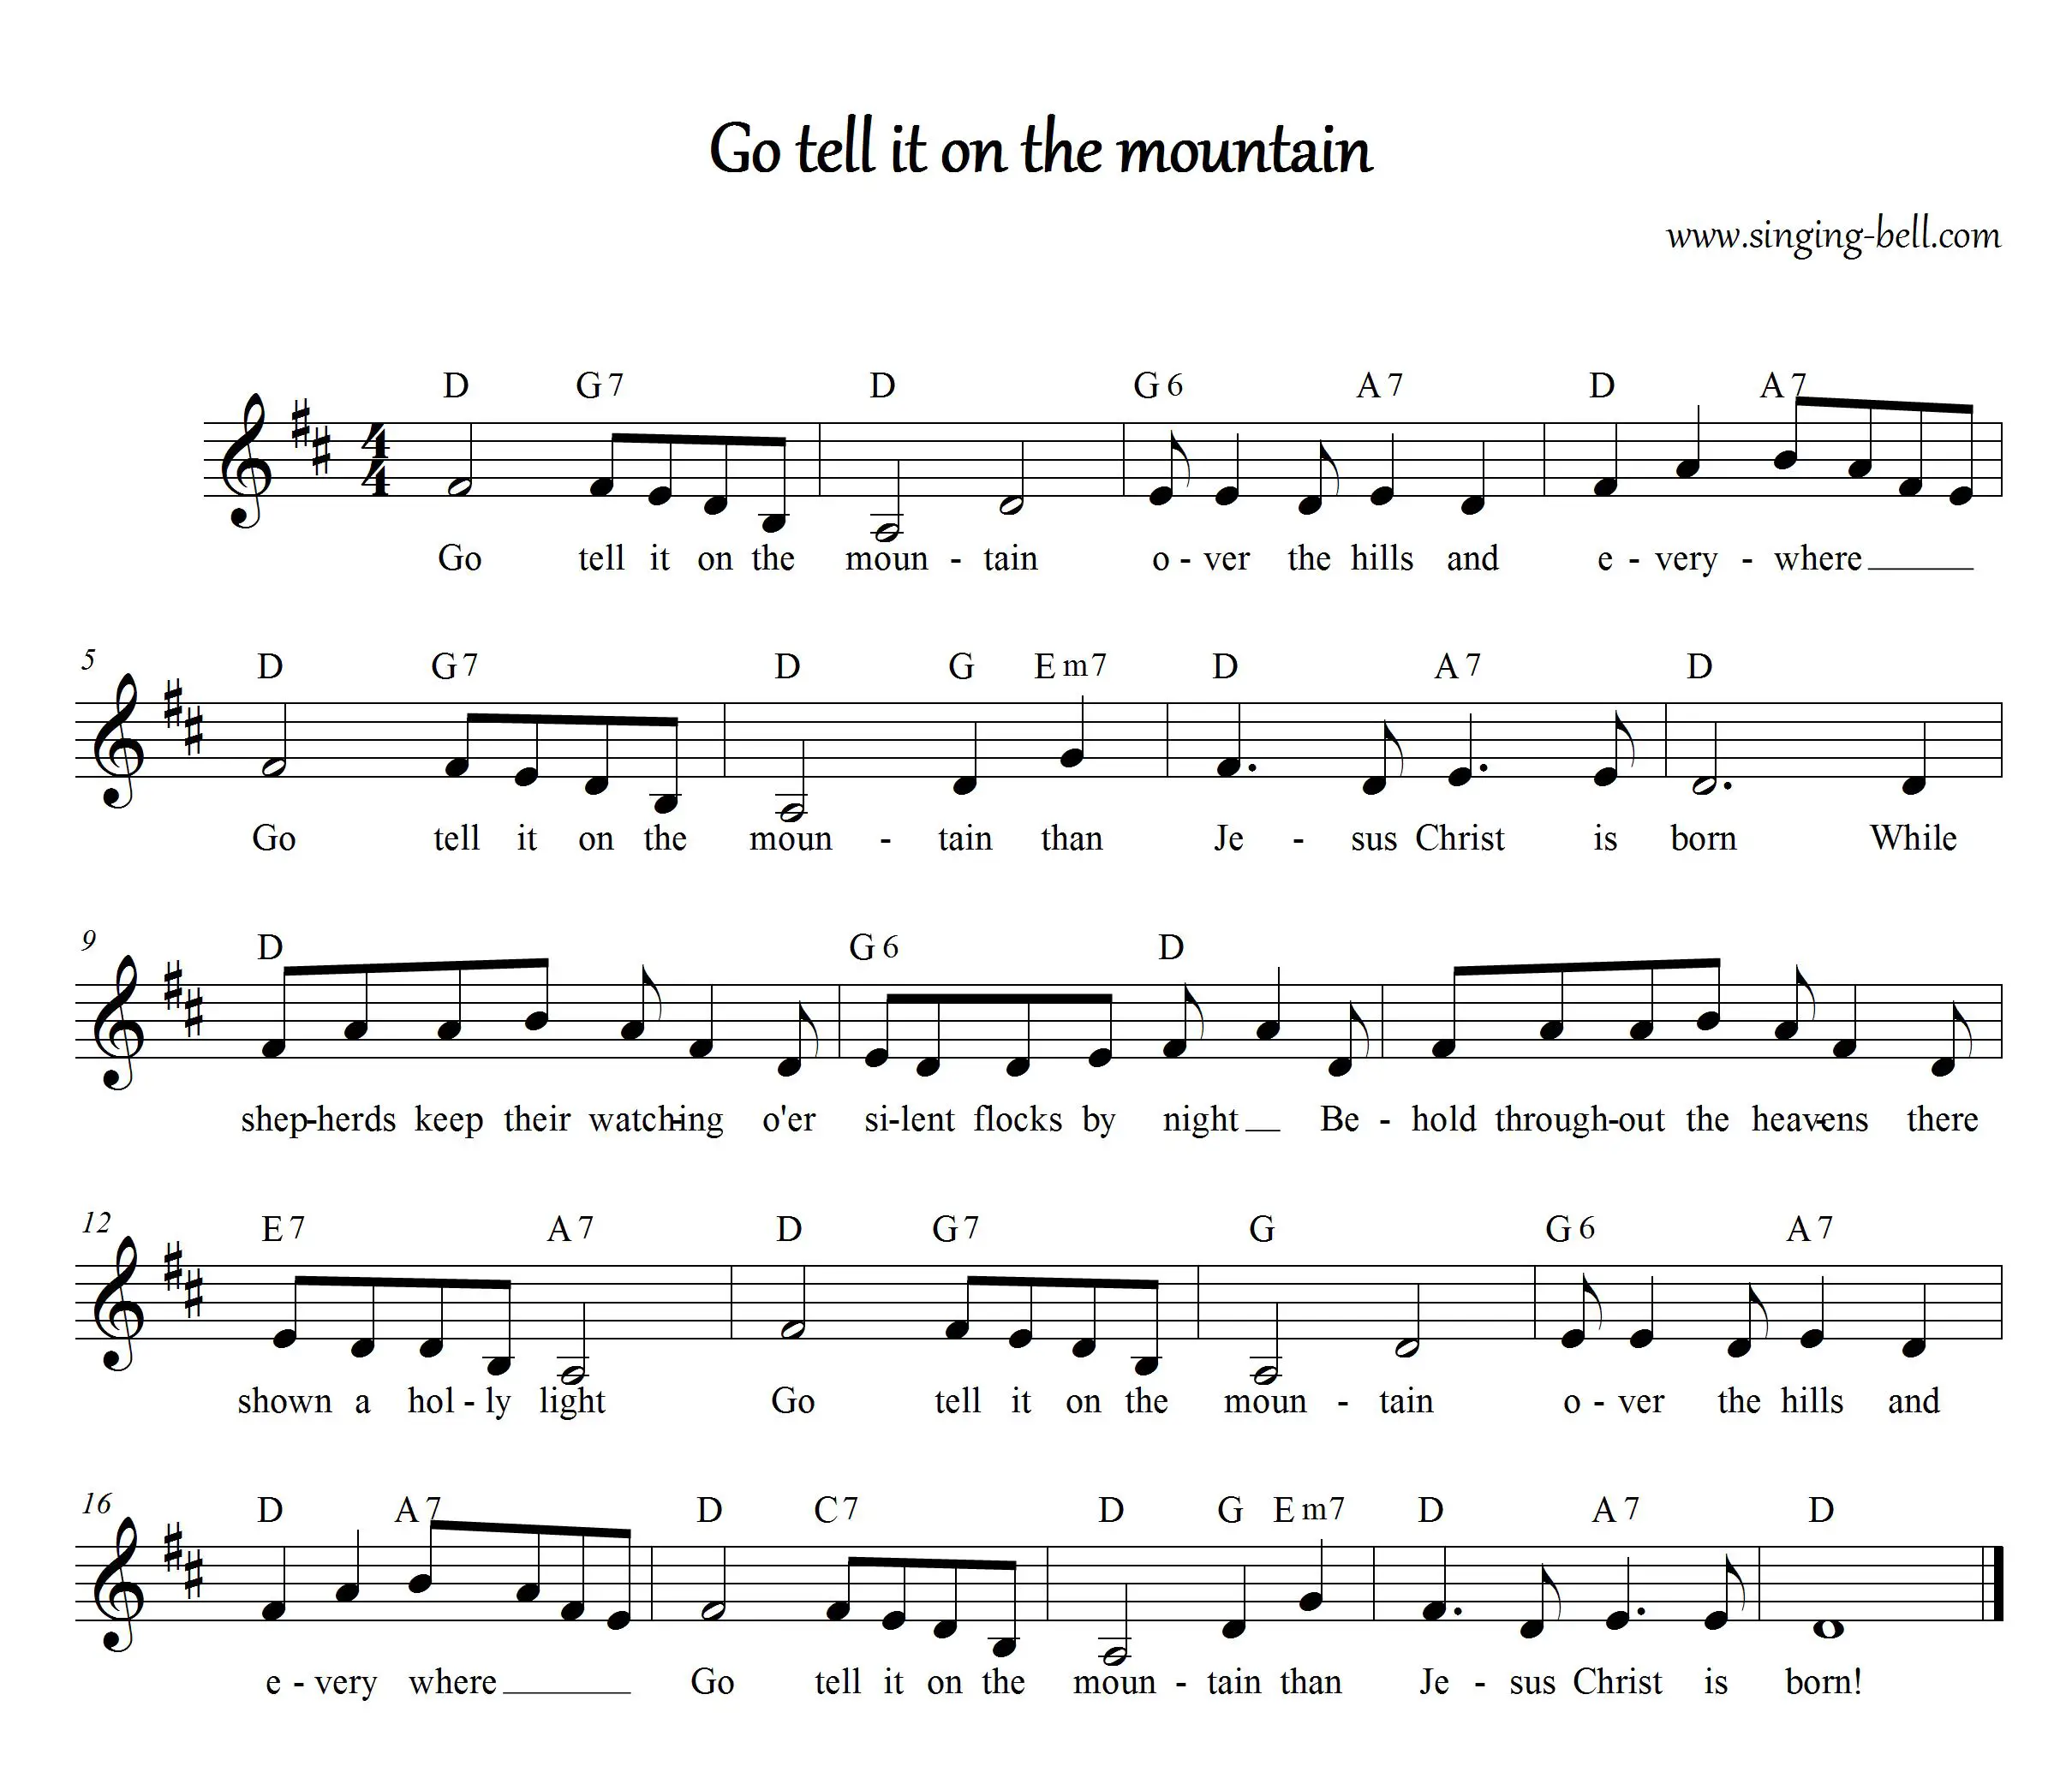 Go tell it on the mountain | Free Music Score